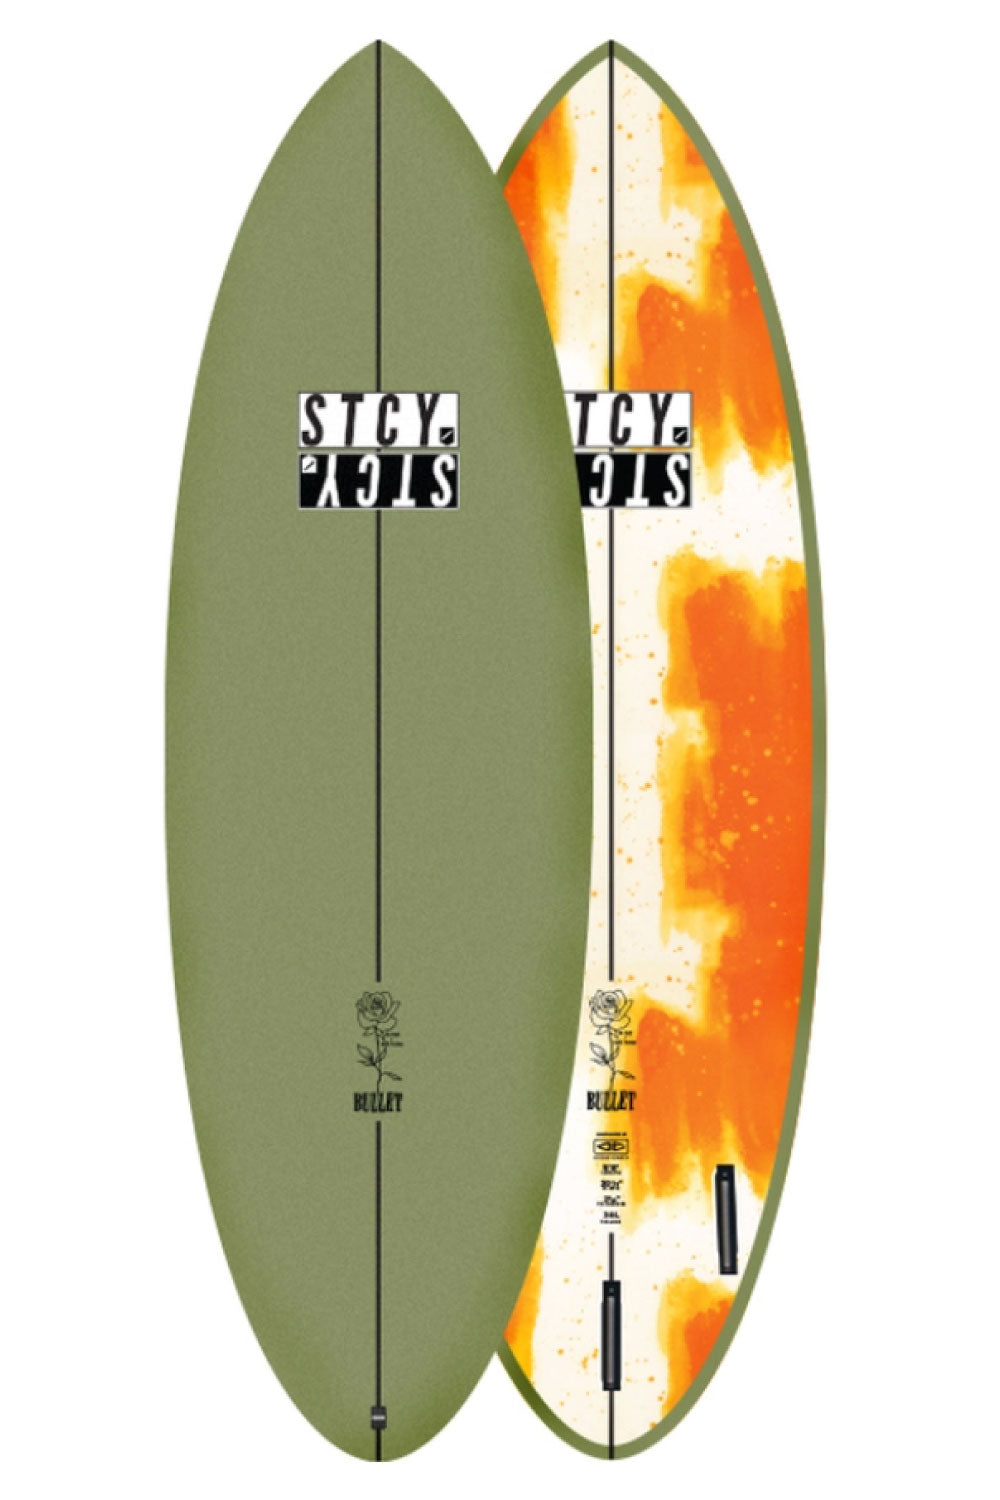 Stacey Bullet Epoxy Softboard - Comes with fins